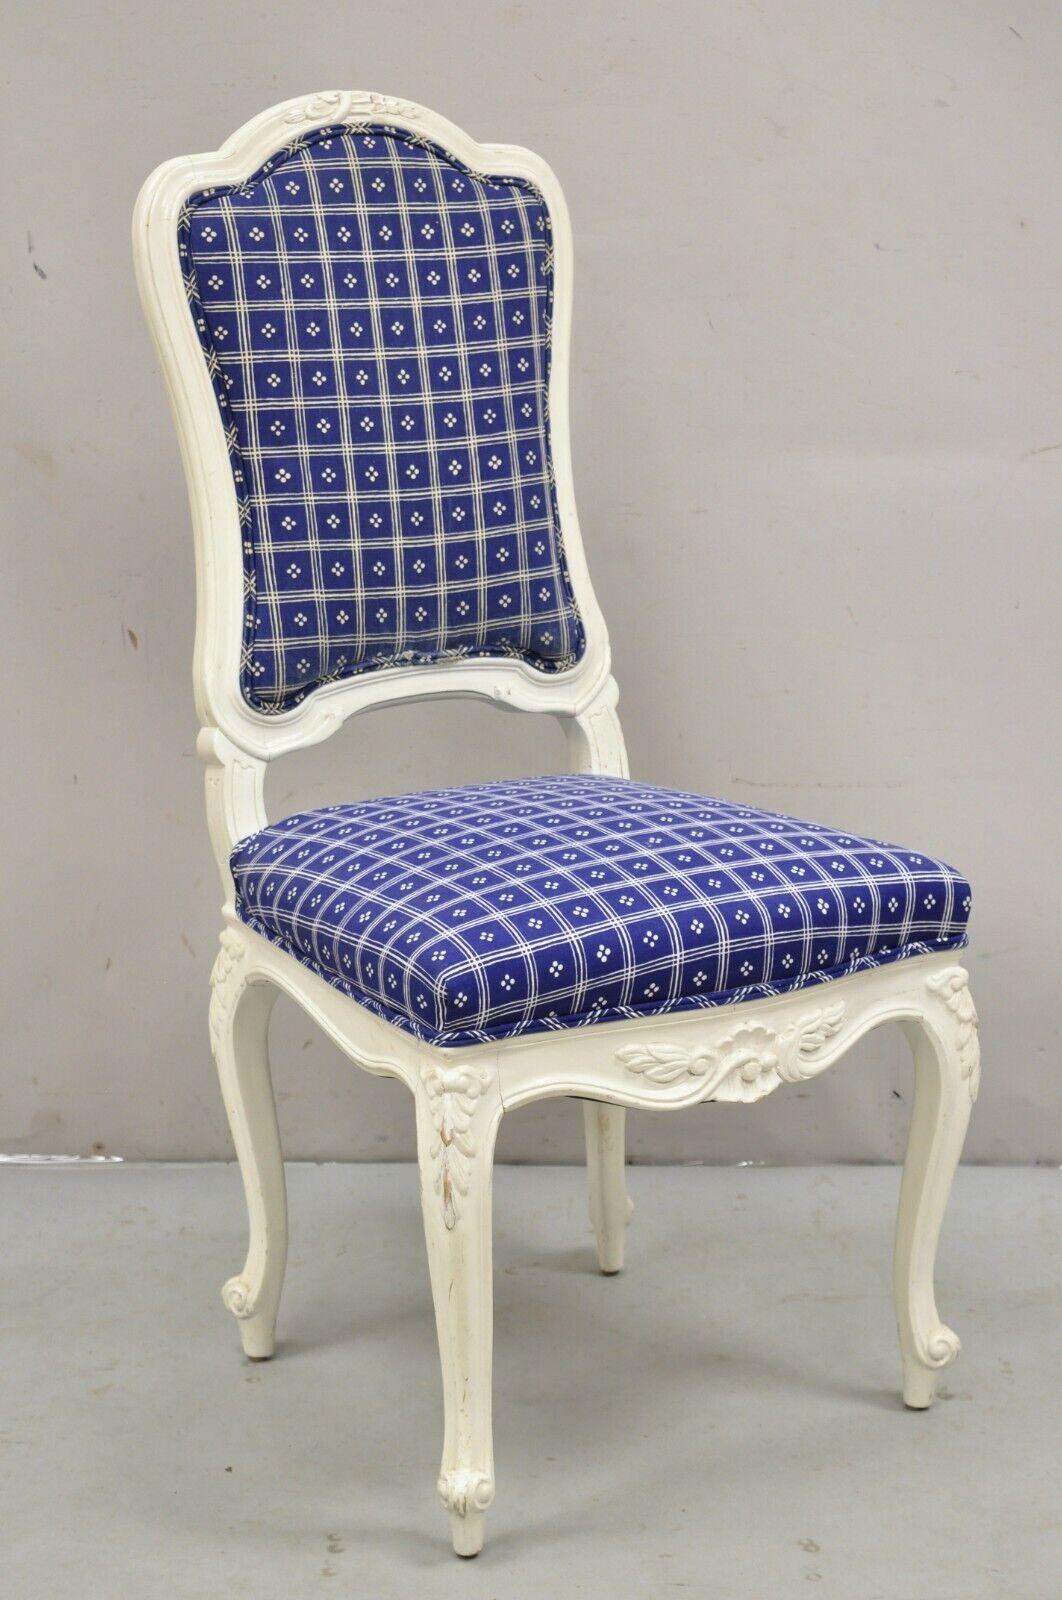 Vintage French Country Style White Painted Carved Wood Dining Chairs - Set of 8. Item features solid wood frames, white distress painted finish, blue plaid upholstery, nicely carved details, very nice set of 8 American made armless dining chairs.